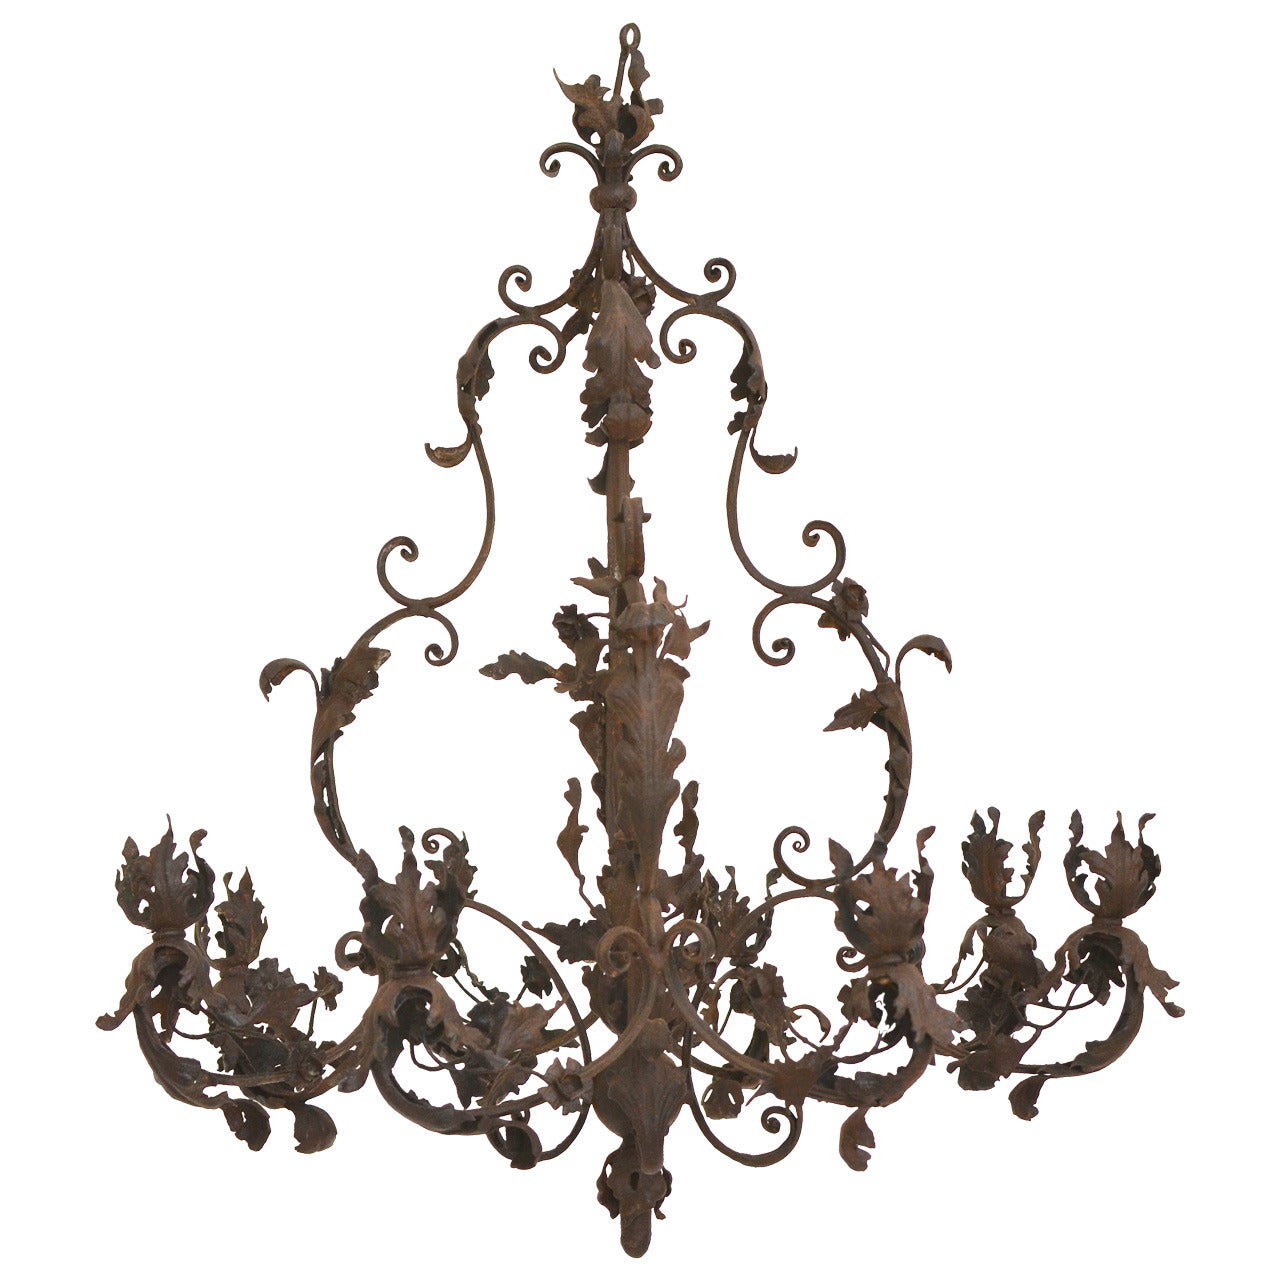 Wrought Iron Rococo Chandelier, 18th Century, Possibly German